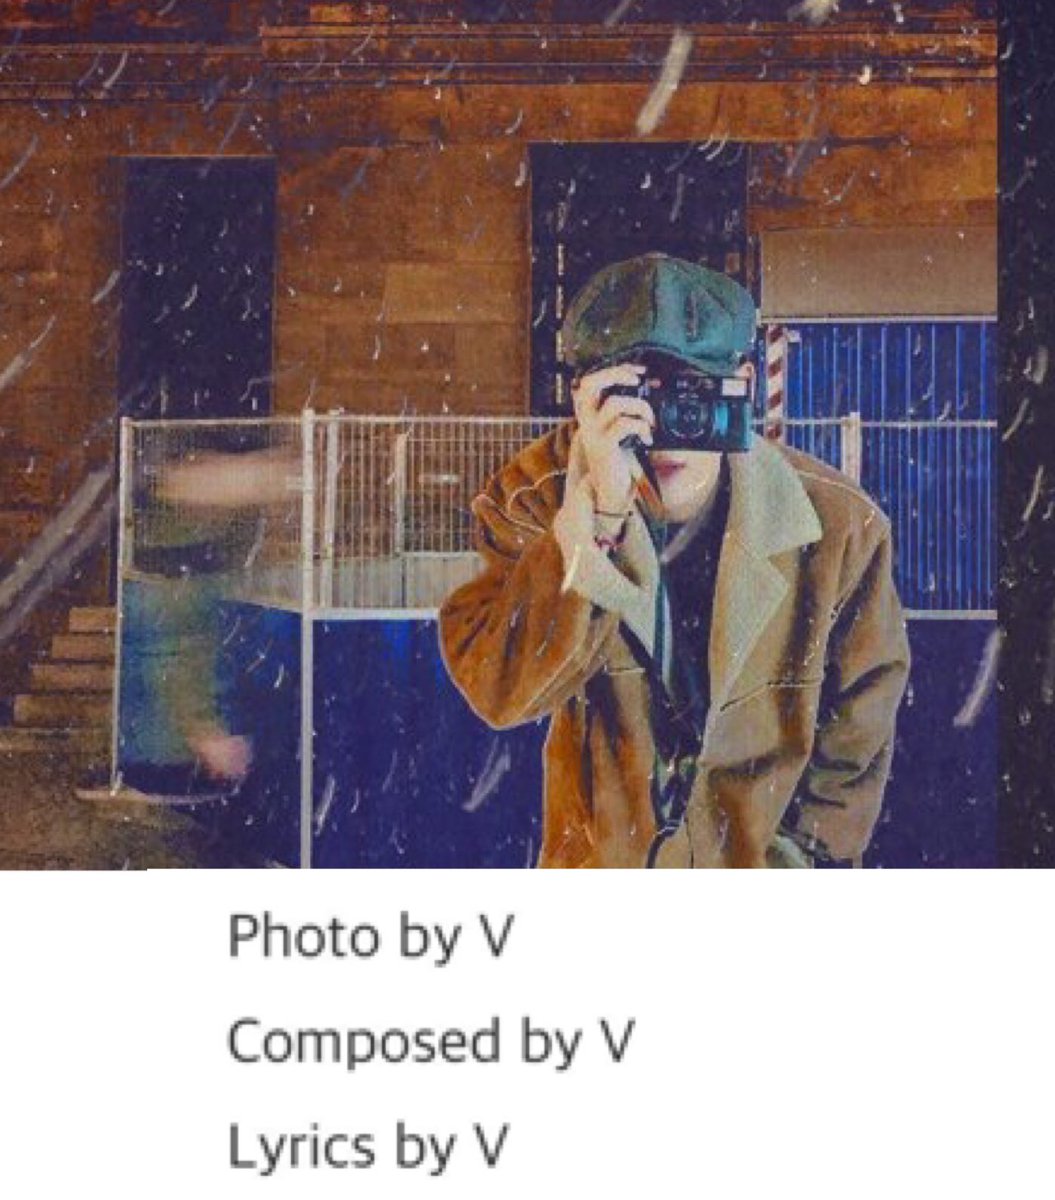 the lyrics to scenery always get me. he worked so hard on this and it really paid off. taehyung is a genius,he did not only compose the song....he wrote these beautiful lyrics and took such amazing shots for it. he is so incredibly talented